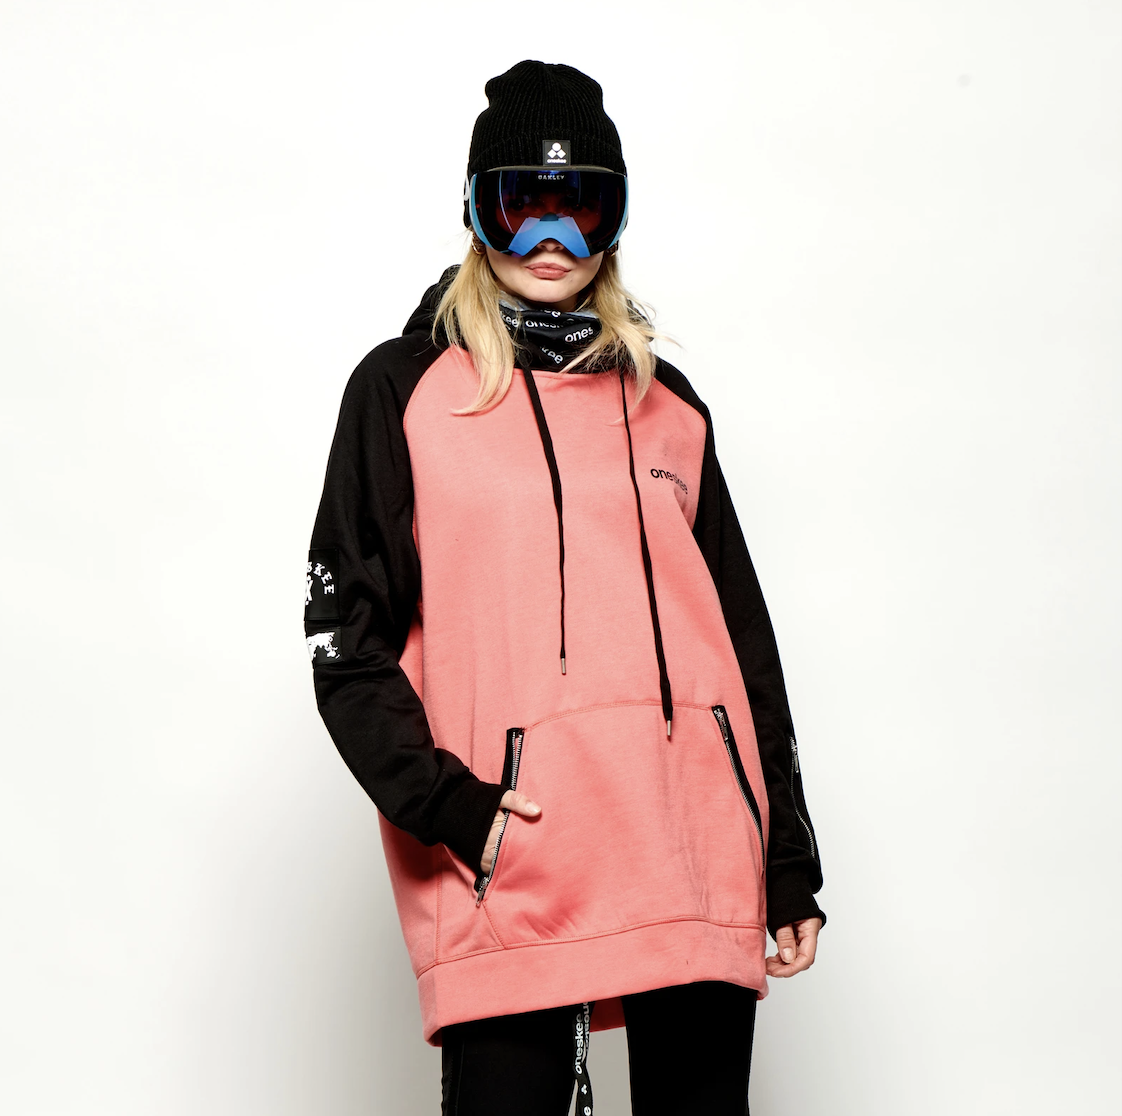 con capucha impermeable para hombre Rosa / Negro - Mujer Wintersport-Store.com